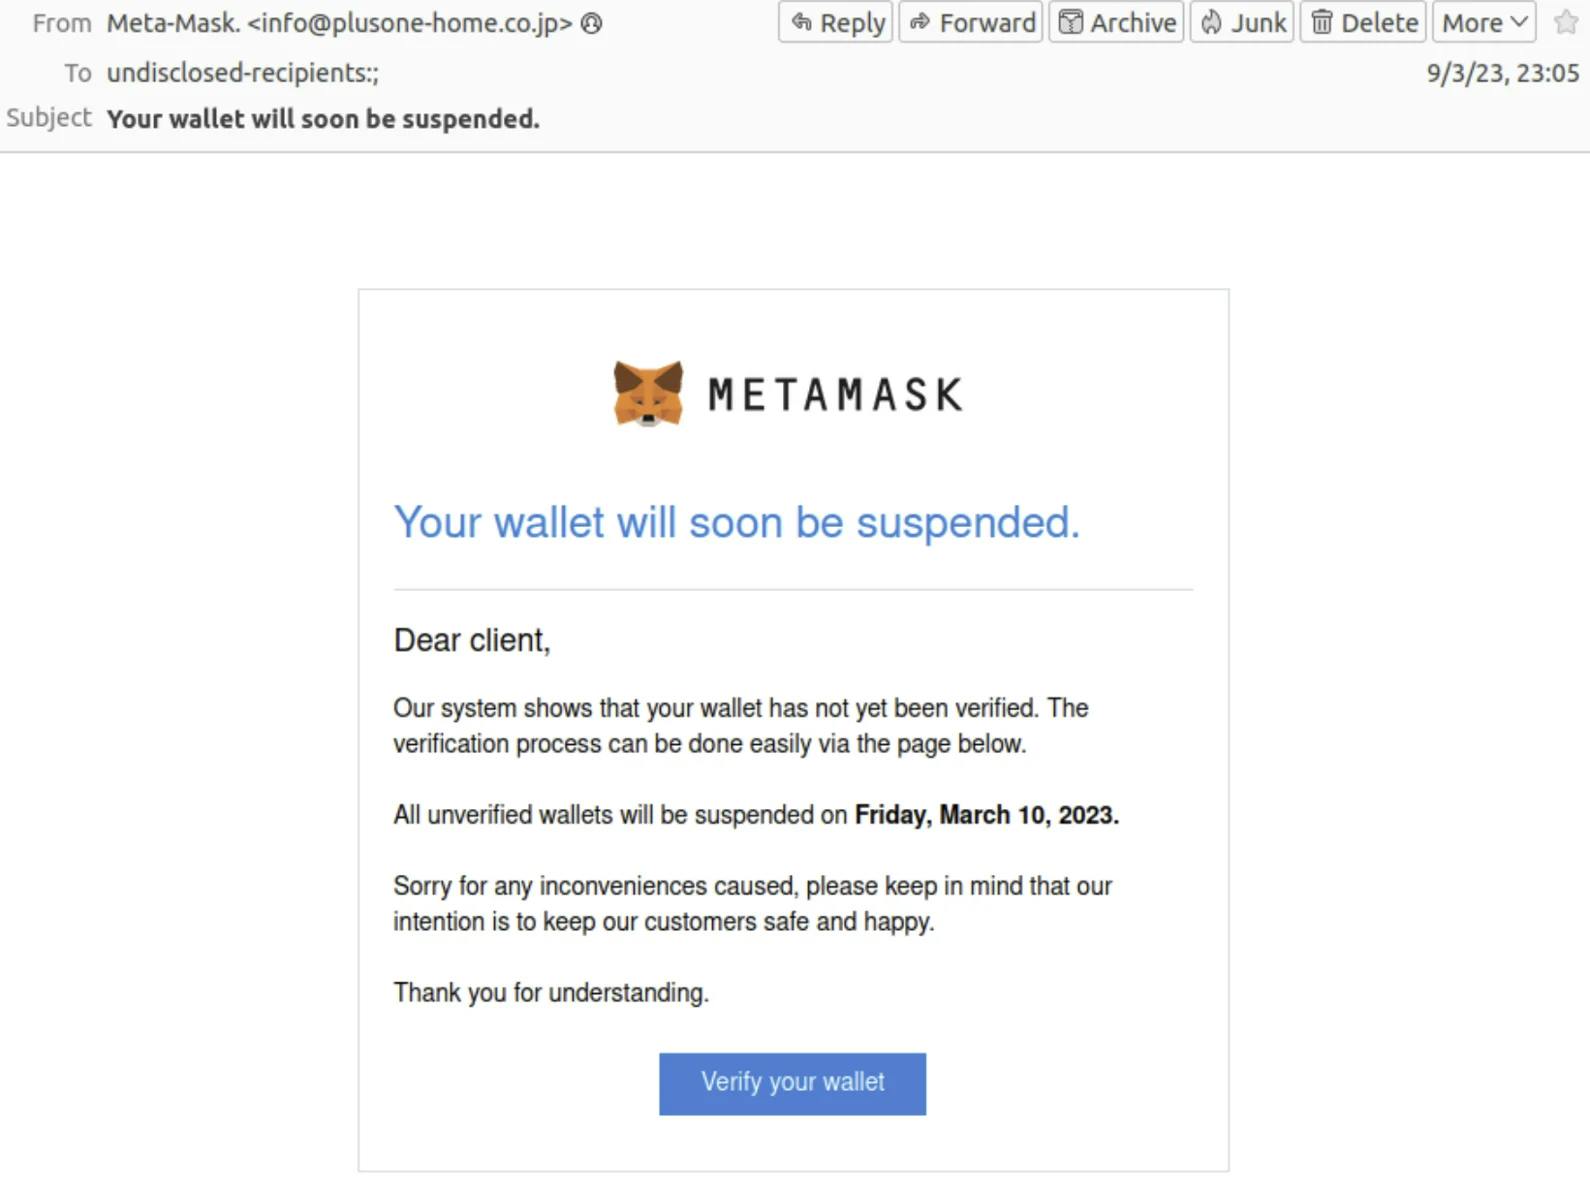 Phishing email claiming to be from MetaMask